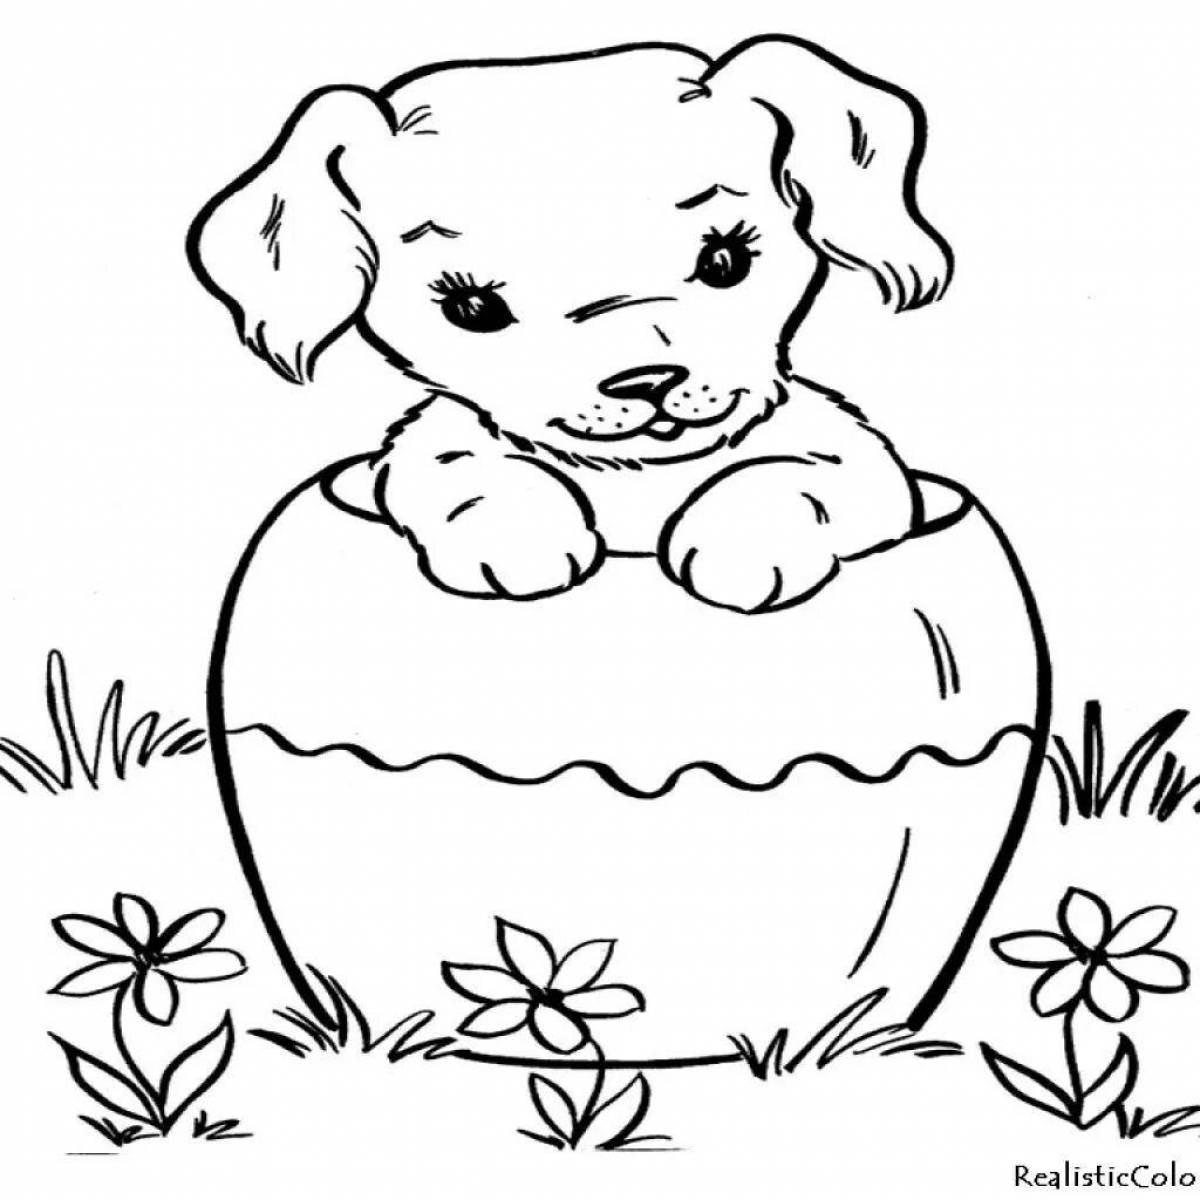 Coloring page gentle little dog